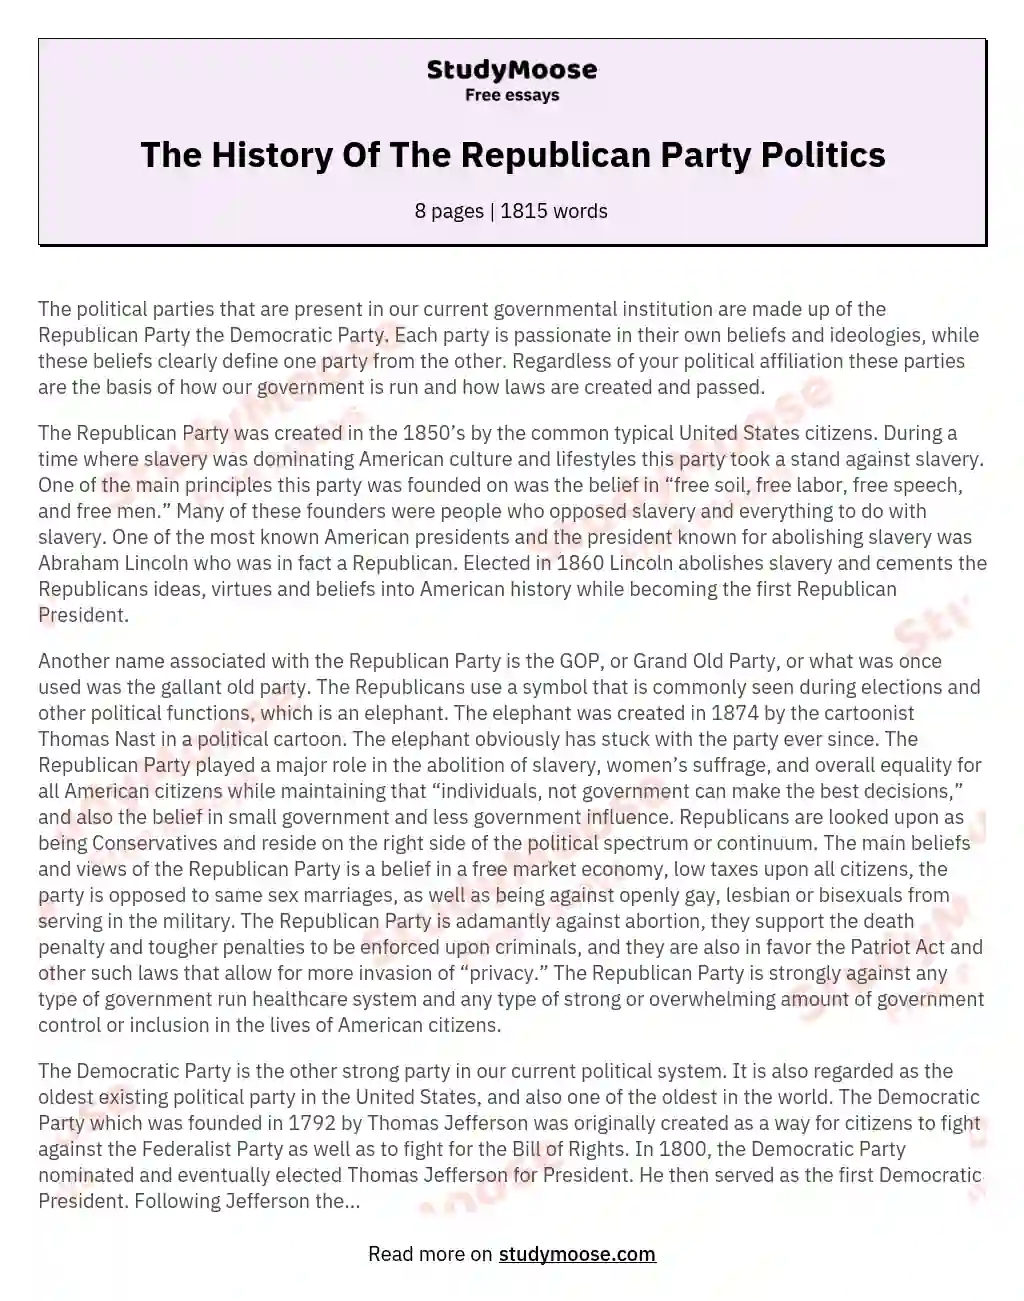 The History Of The Republican Party Politics